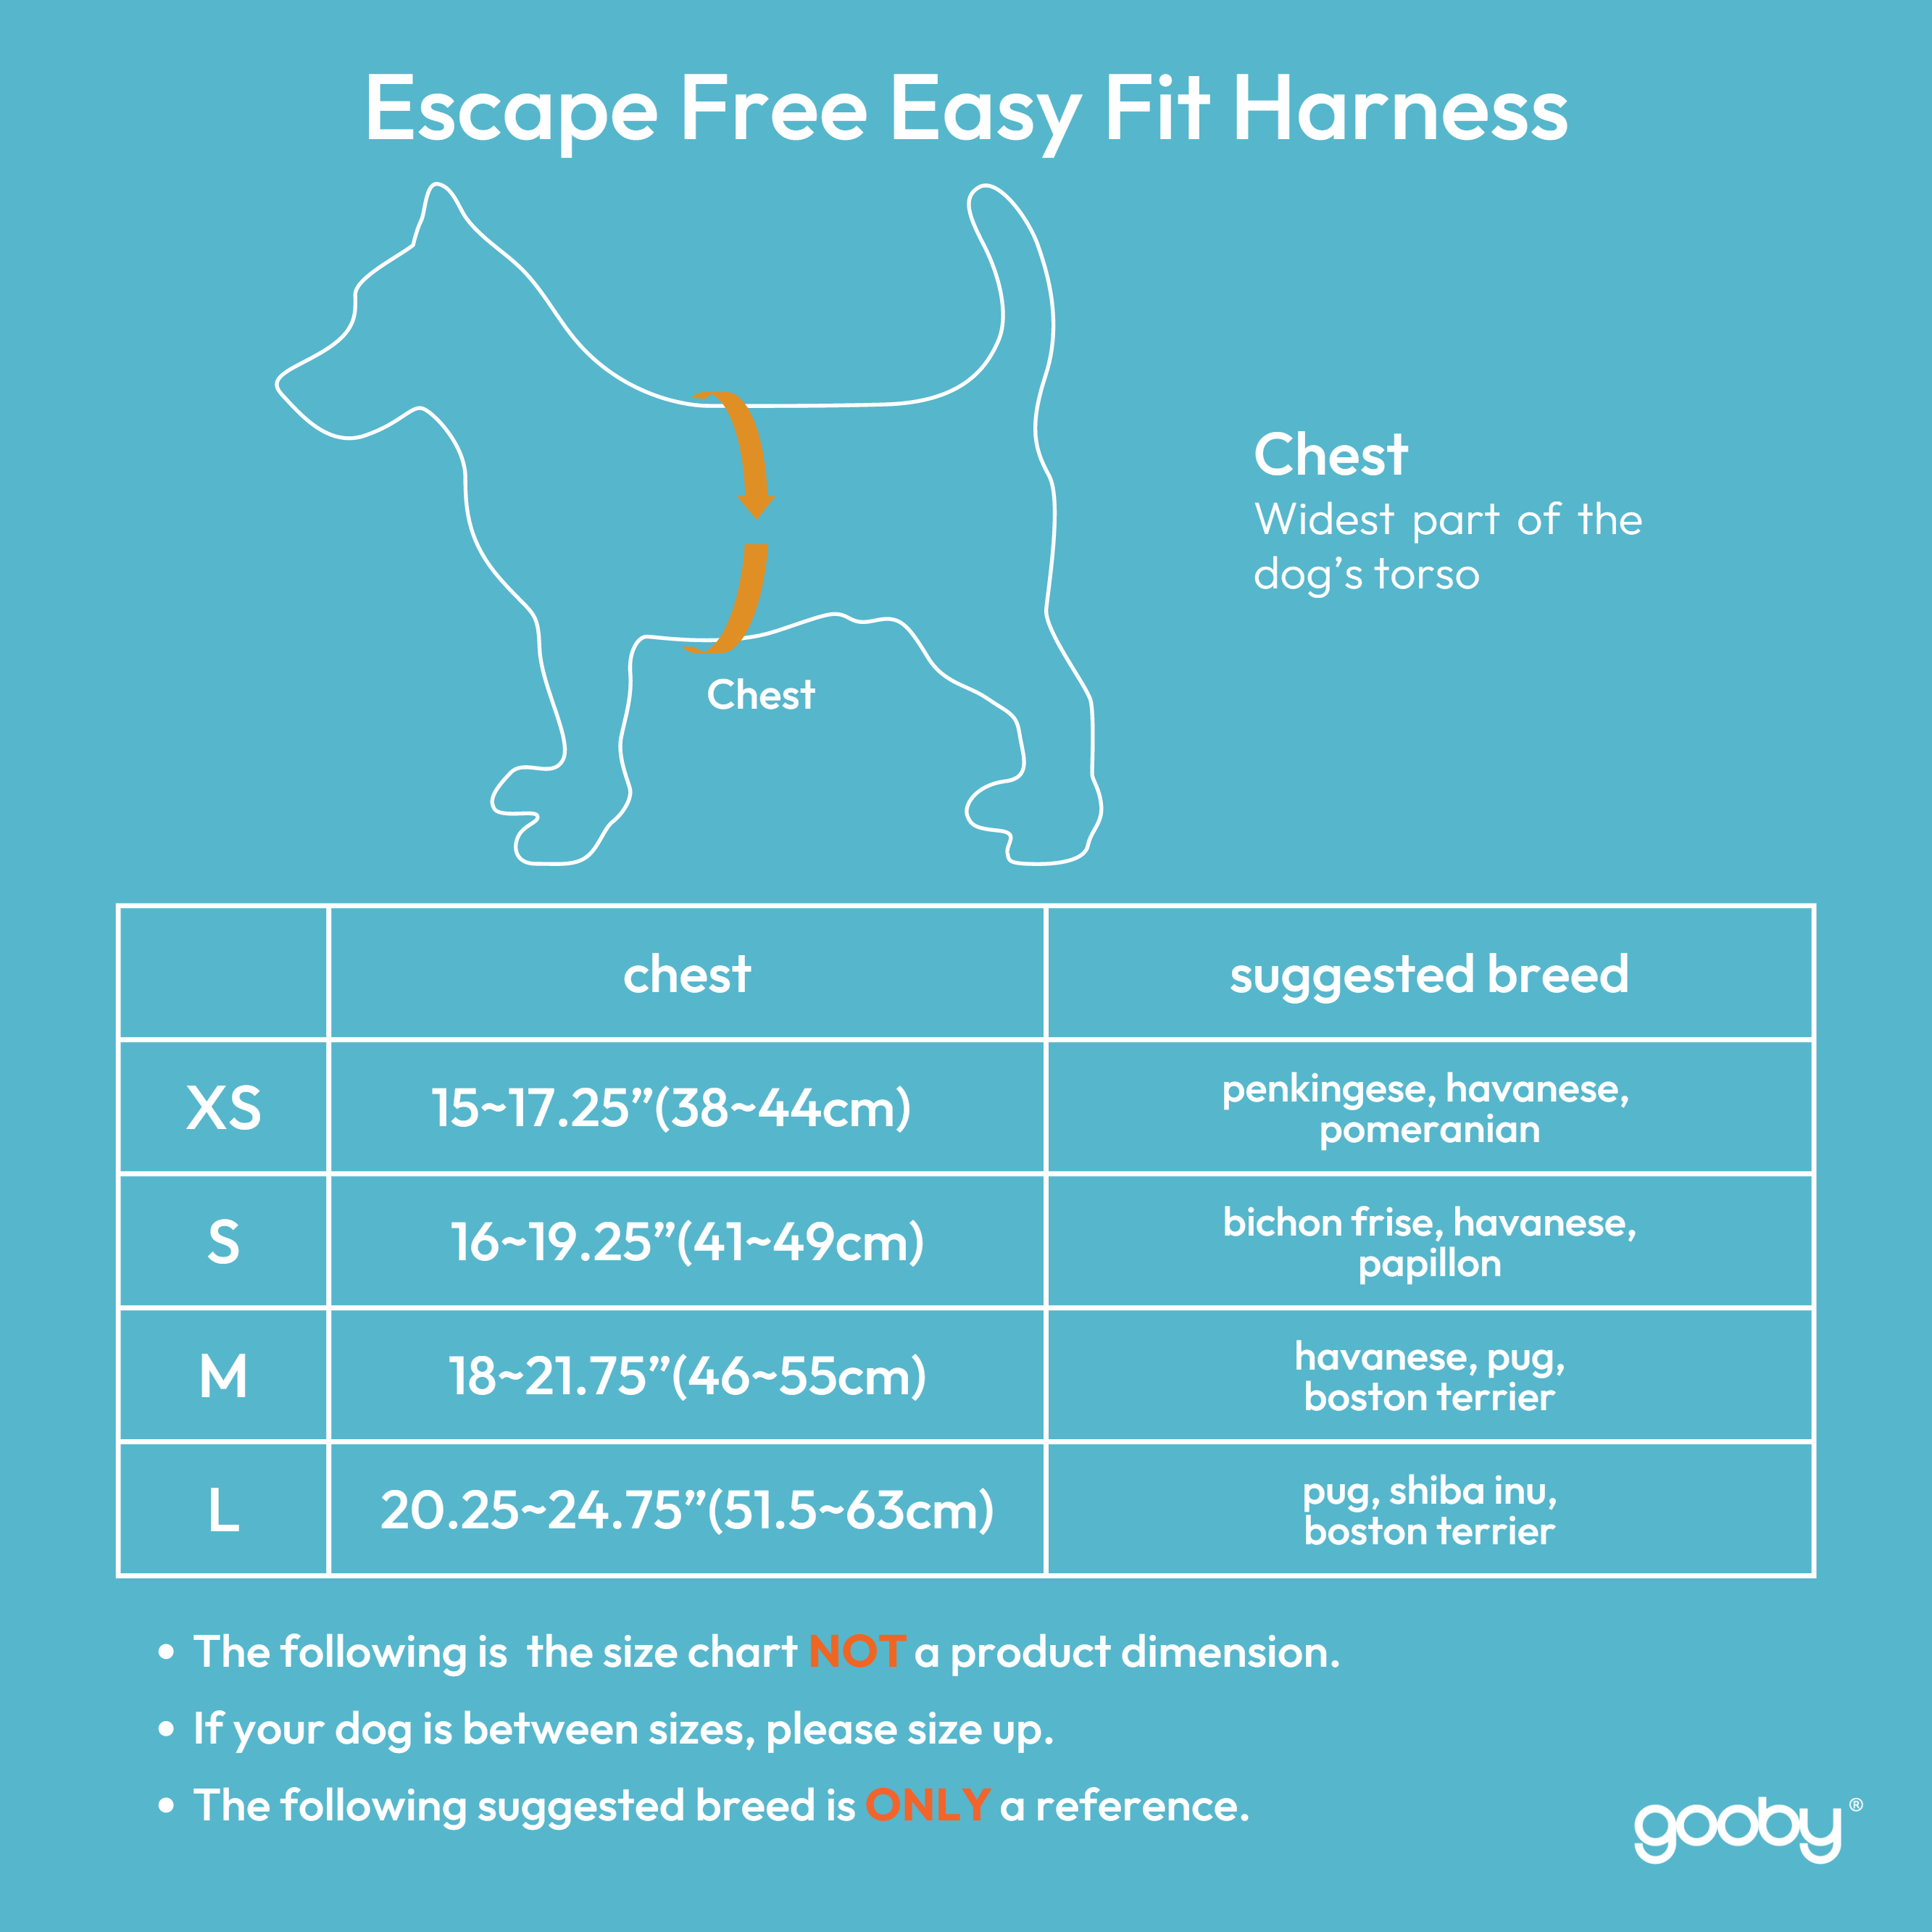 Gooby Escape Free Easy Fit Harness Orange, Large Escape Free Step-In  Harness with Neoprene Body for Small Dogs and Medium Dogs Indoor and  Outdoor use